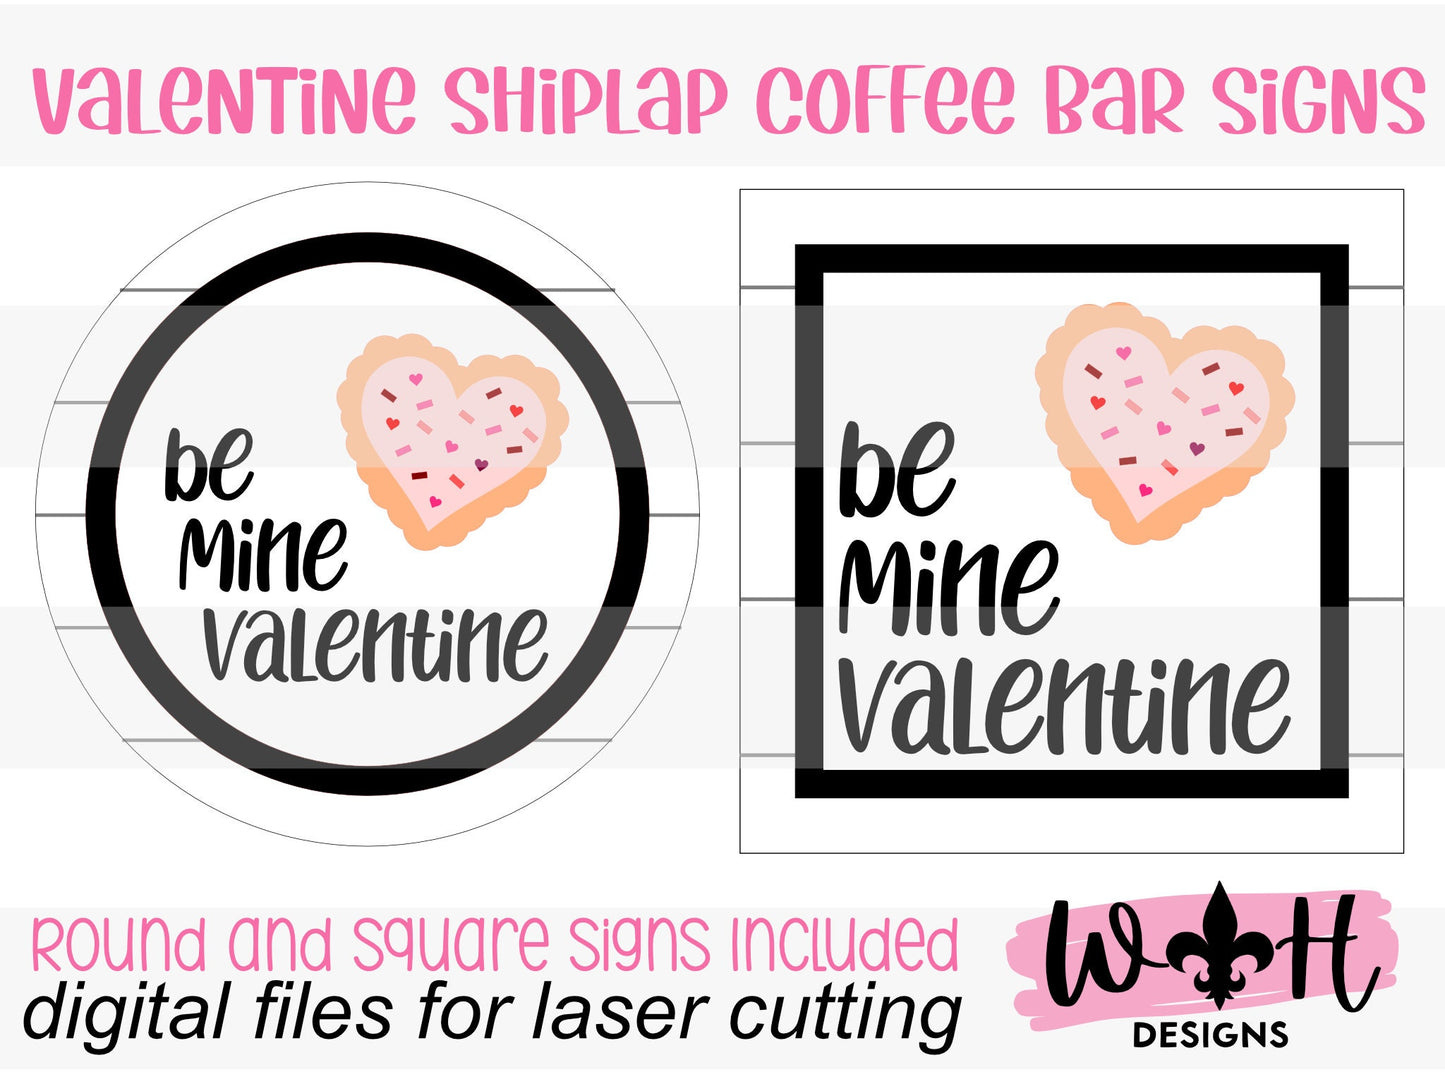 Be Mine Valentine Cookie Shiplap Shelf Sitter - Round and Square Frames - Files for Sign Making - SVG Cut File For Glowforge - Digital File